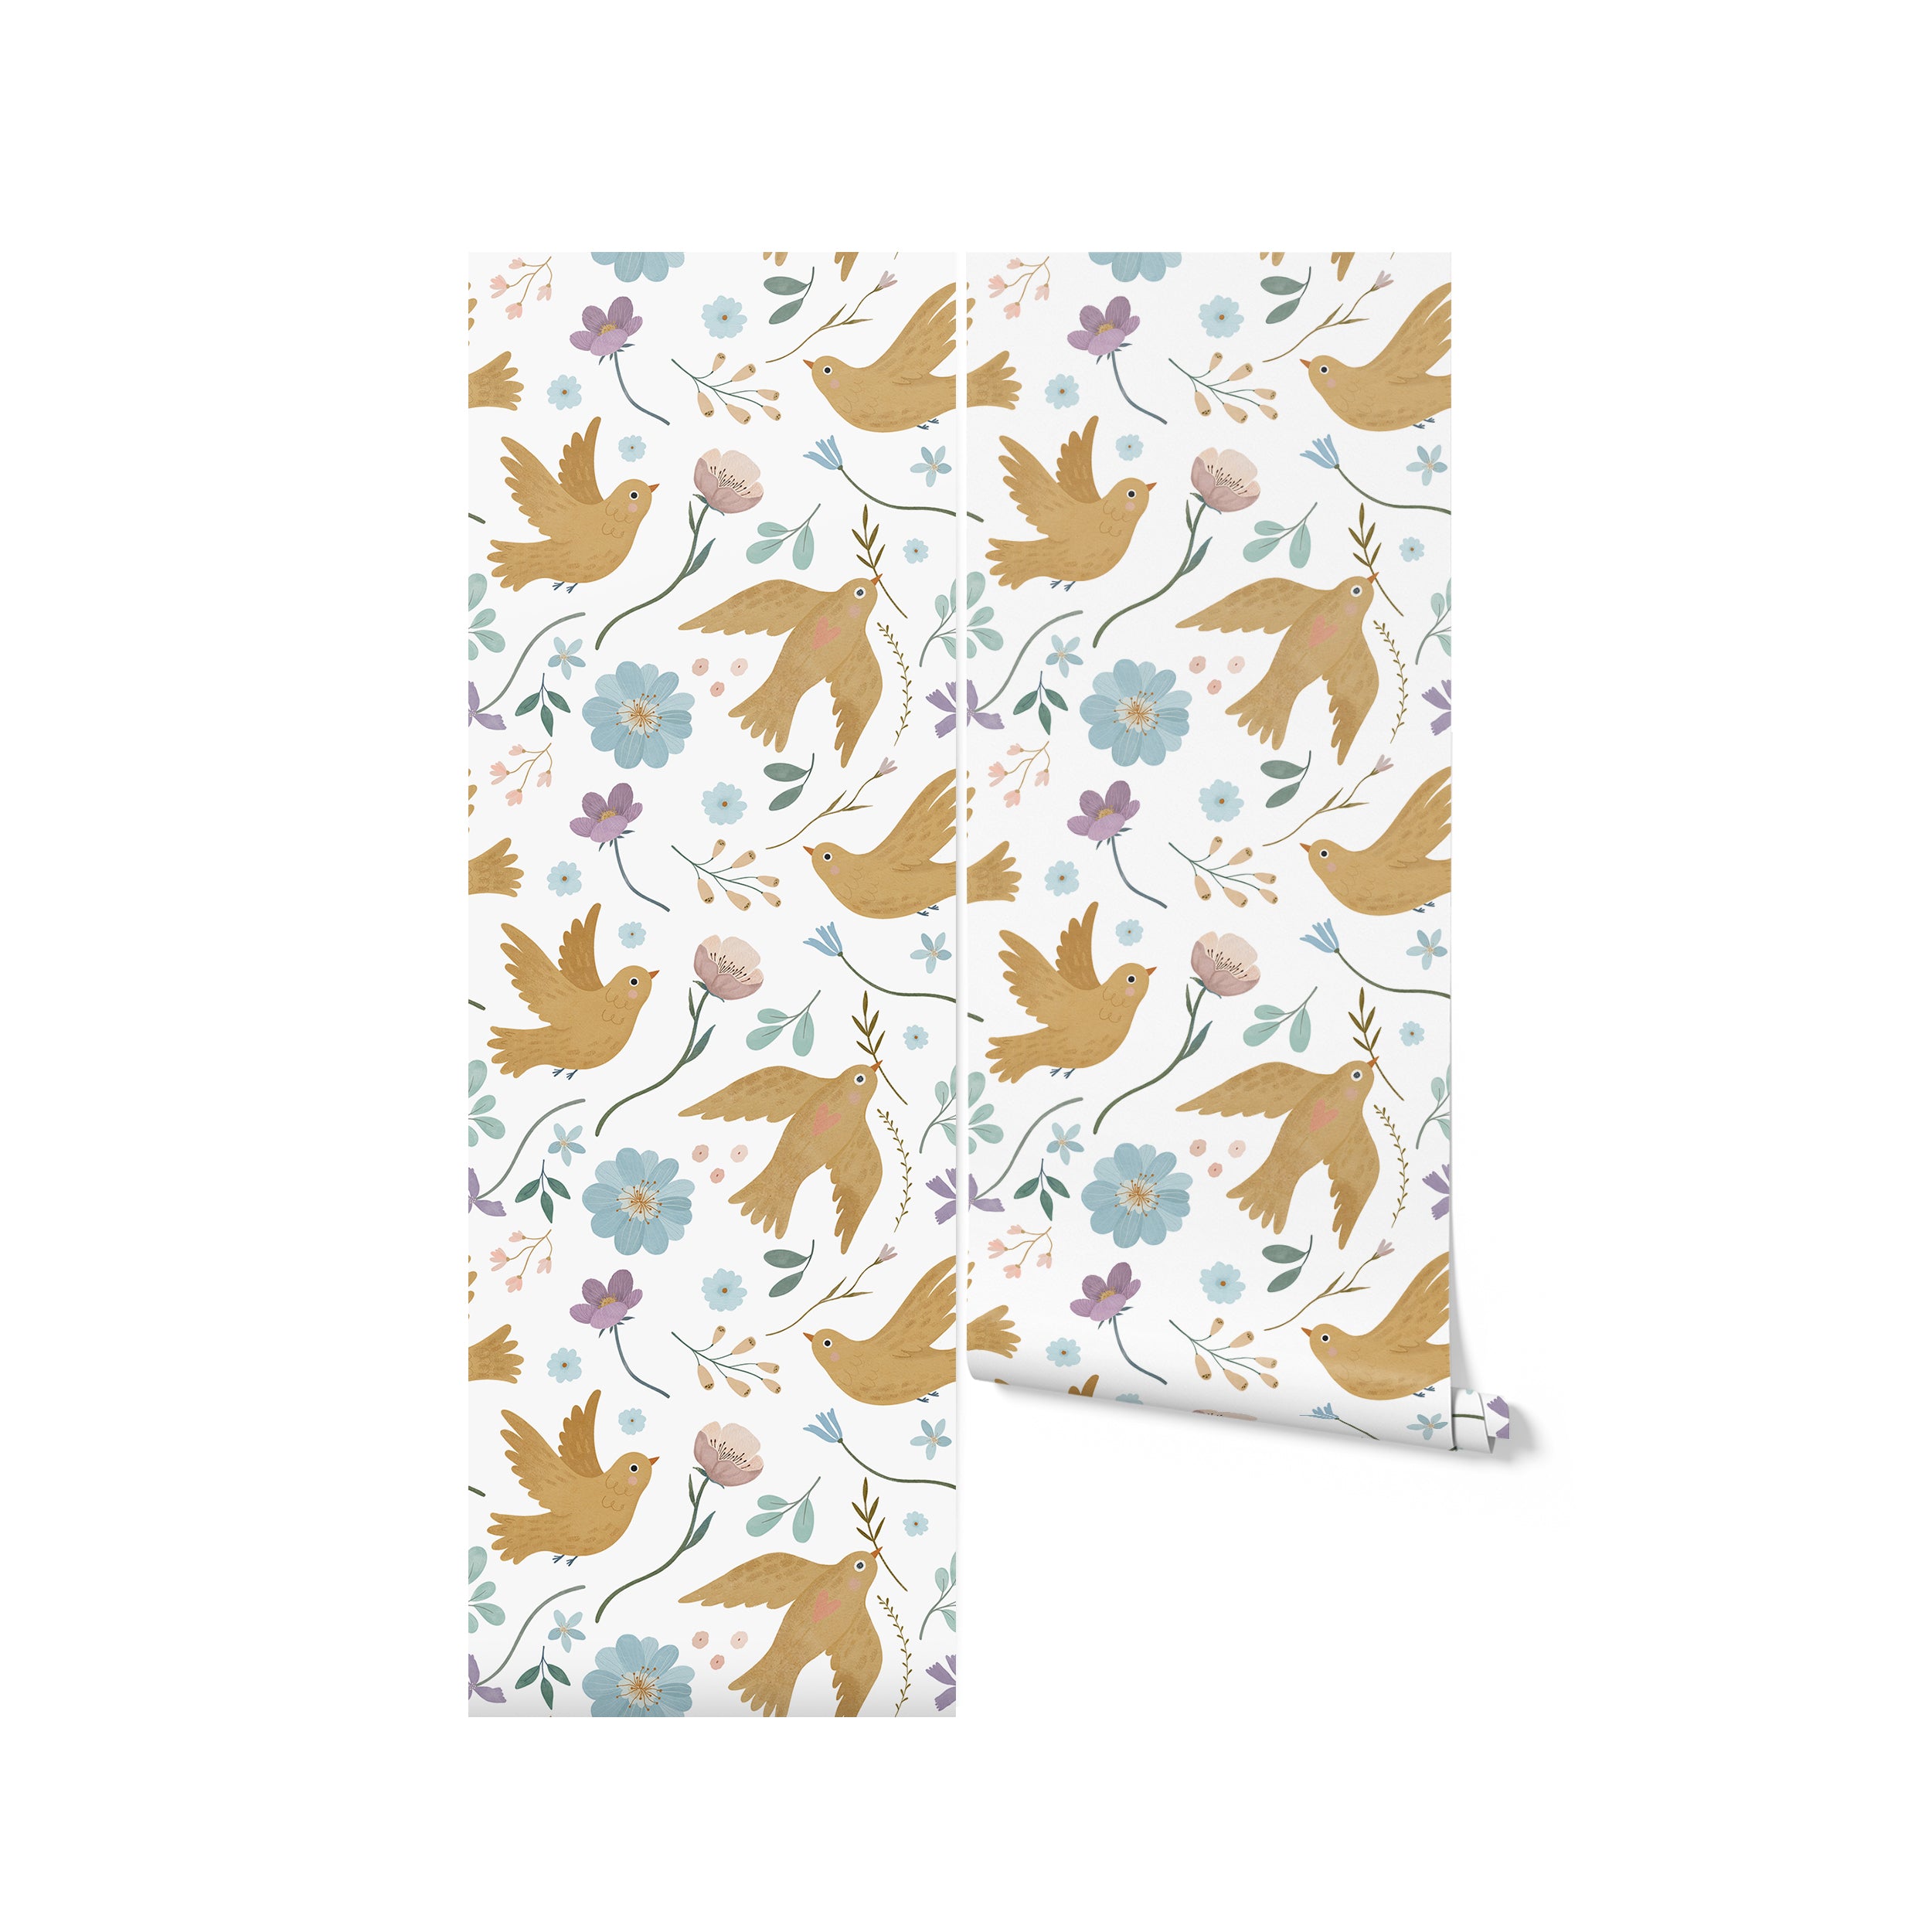 A roll of Pastel Bird Wallpaper displaying a whimsical pattern of golden birds and pastel-colored flowers, perfect for bringing a touch of nature and lightness to any room